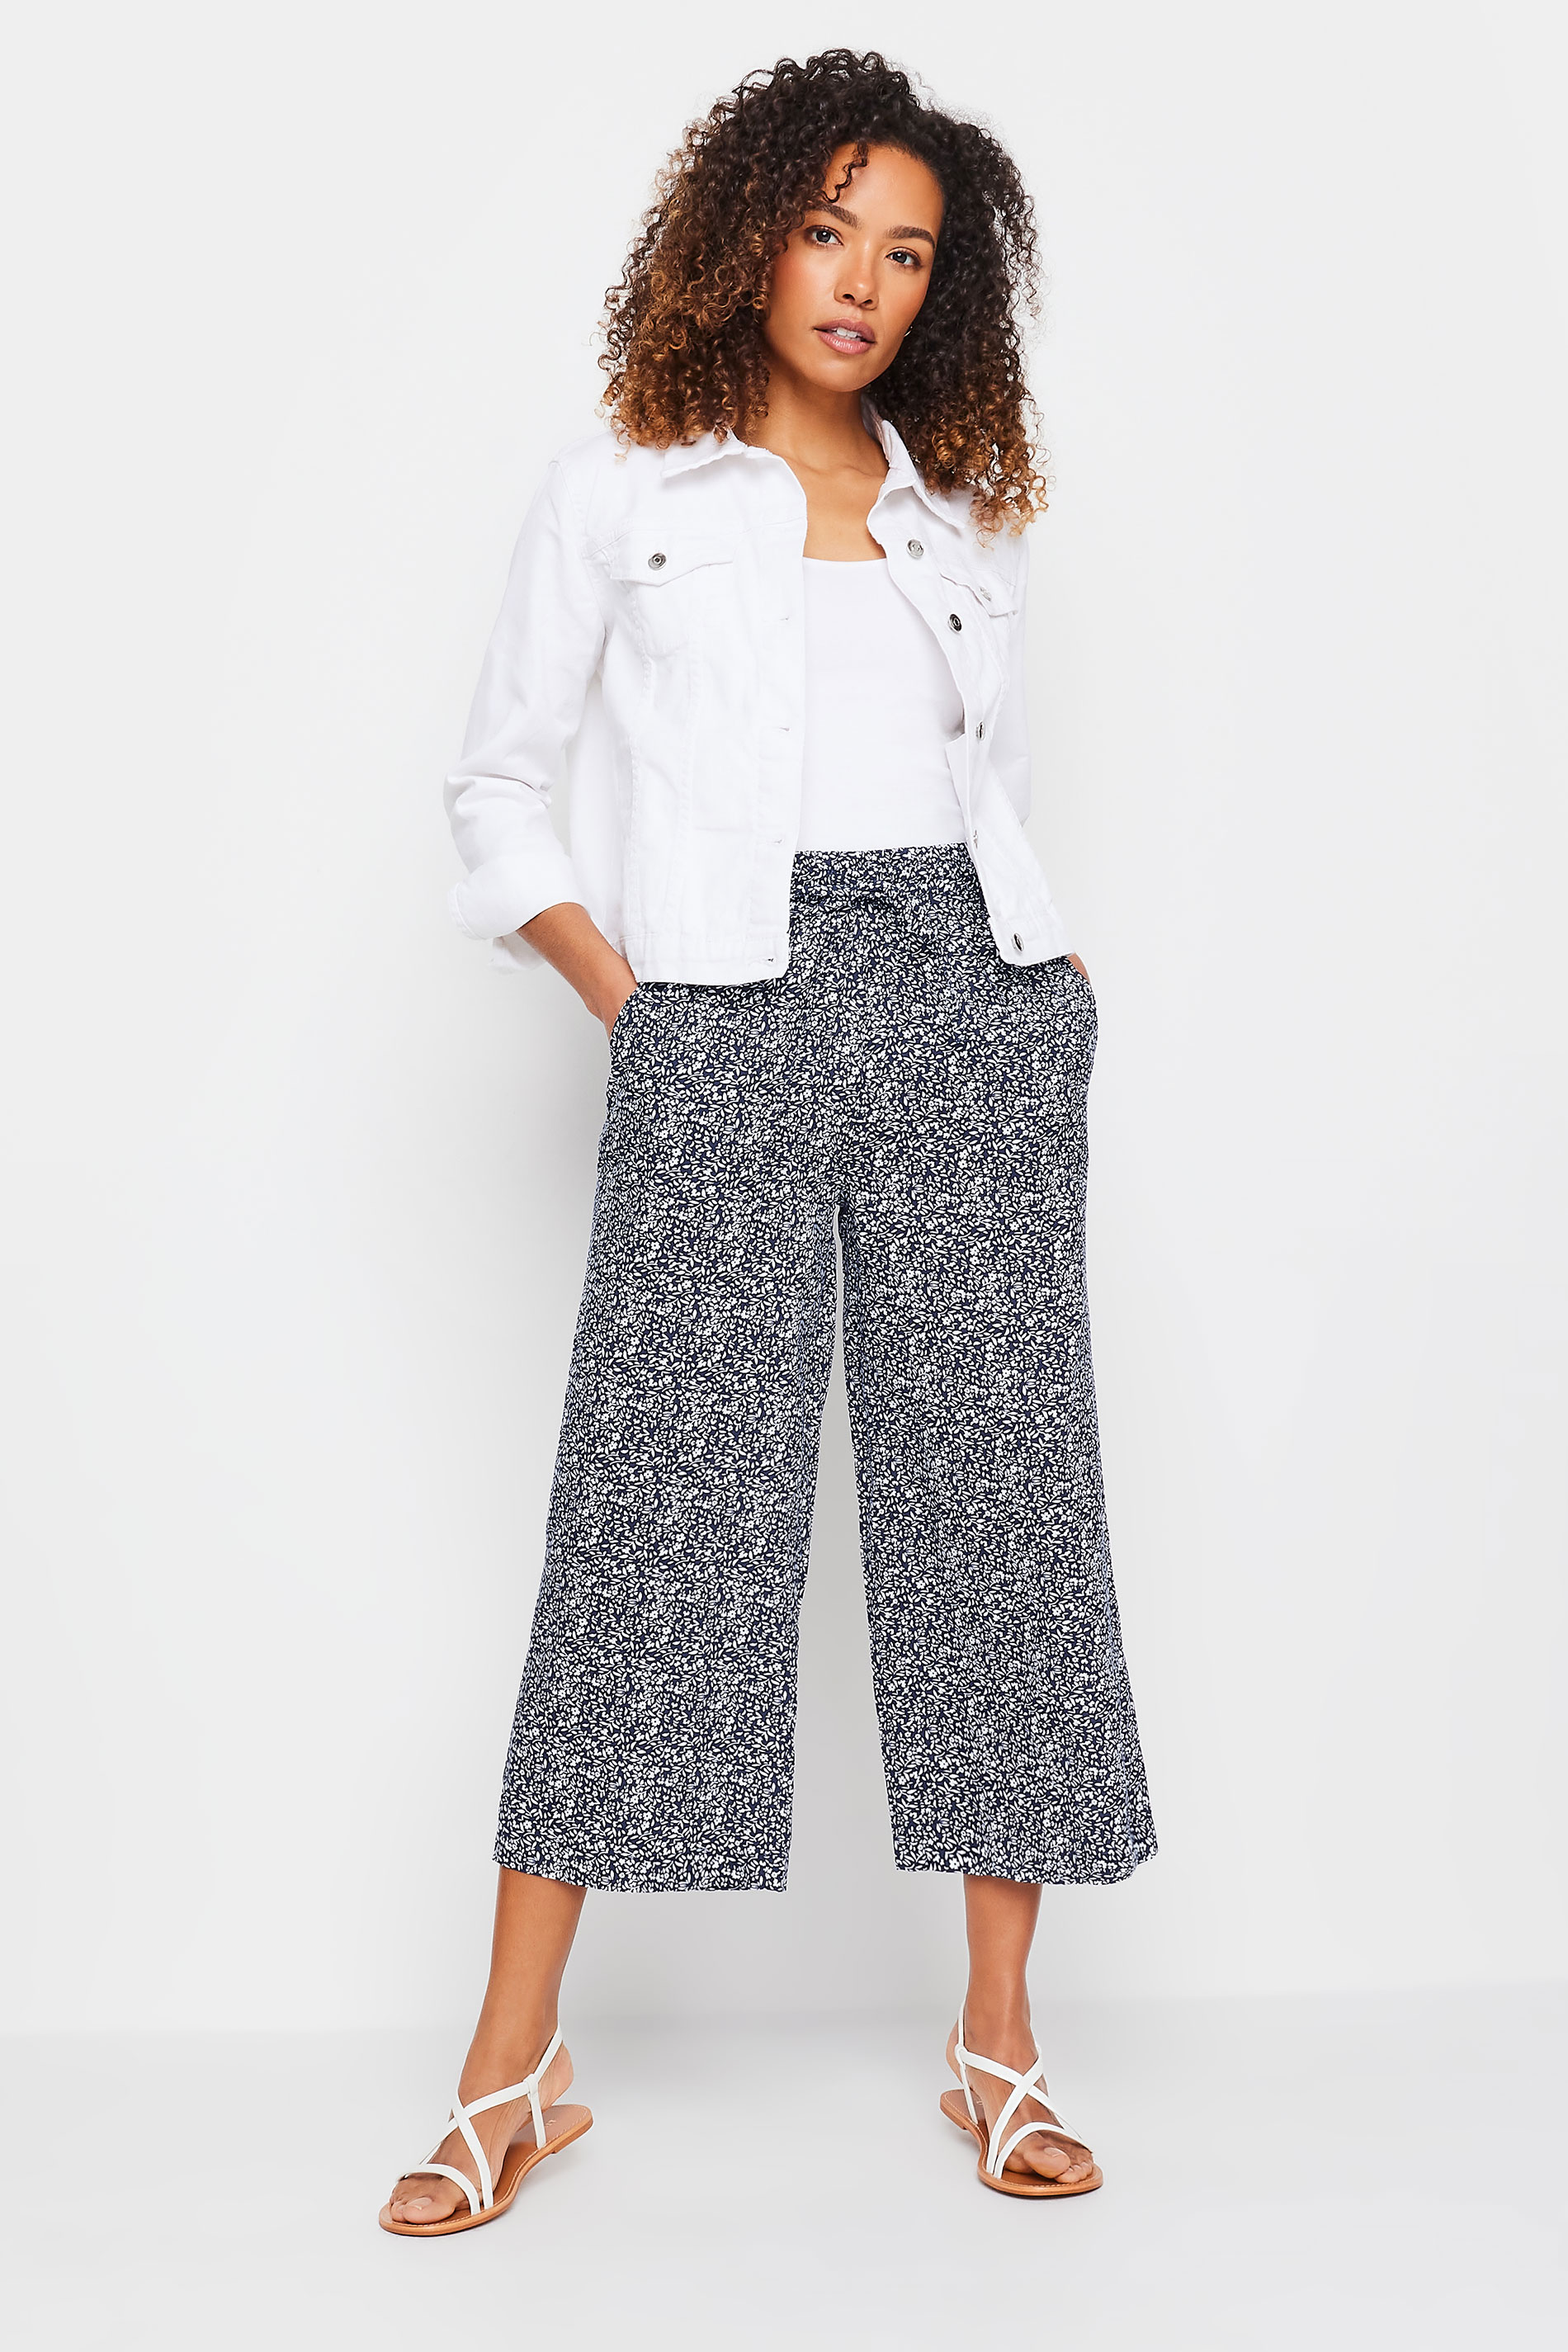 M&Co Navy Blue Ditsy Floral Culottes | M&Co 1